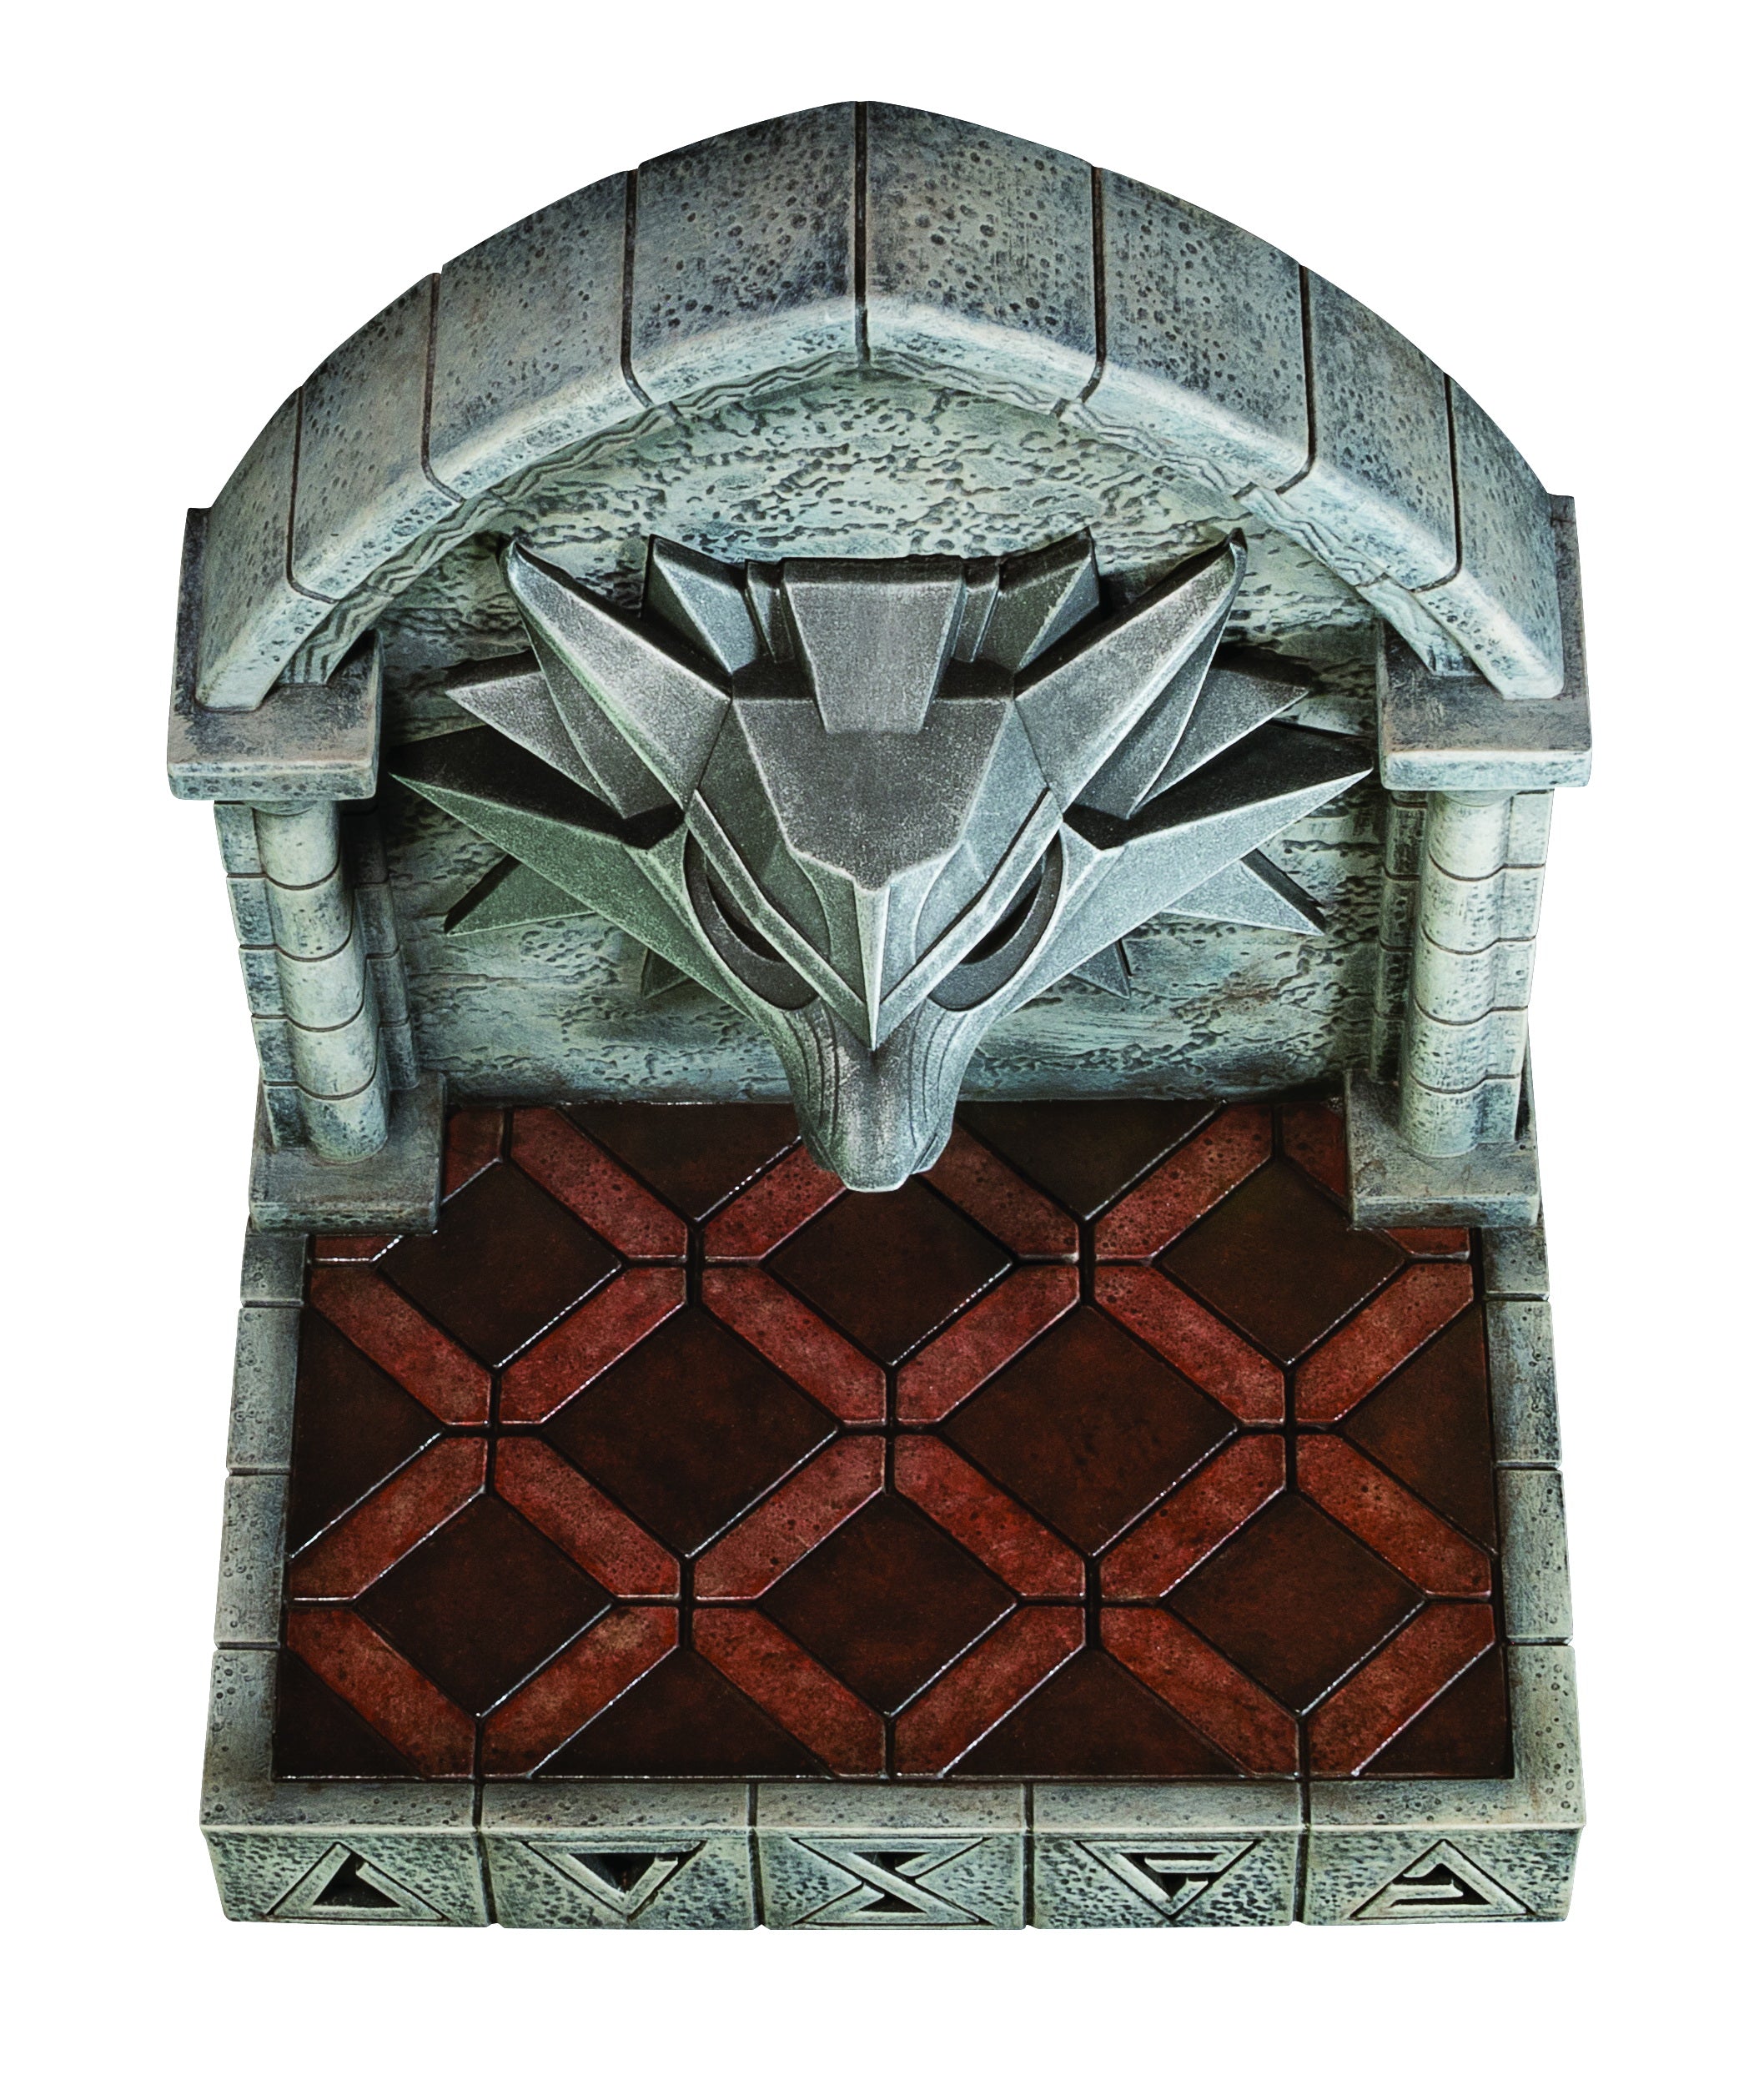 PRE-ORDER The Witcher 3 - Wild Hunt: Bookends